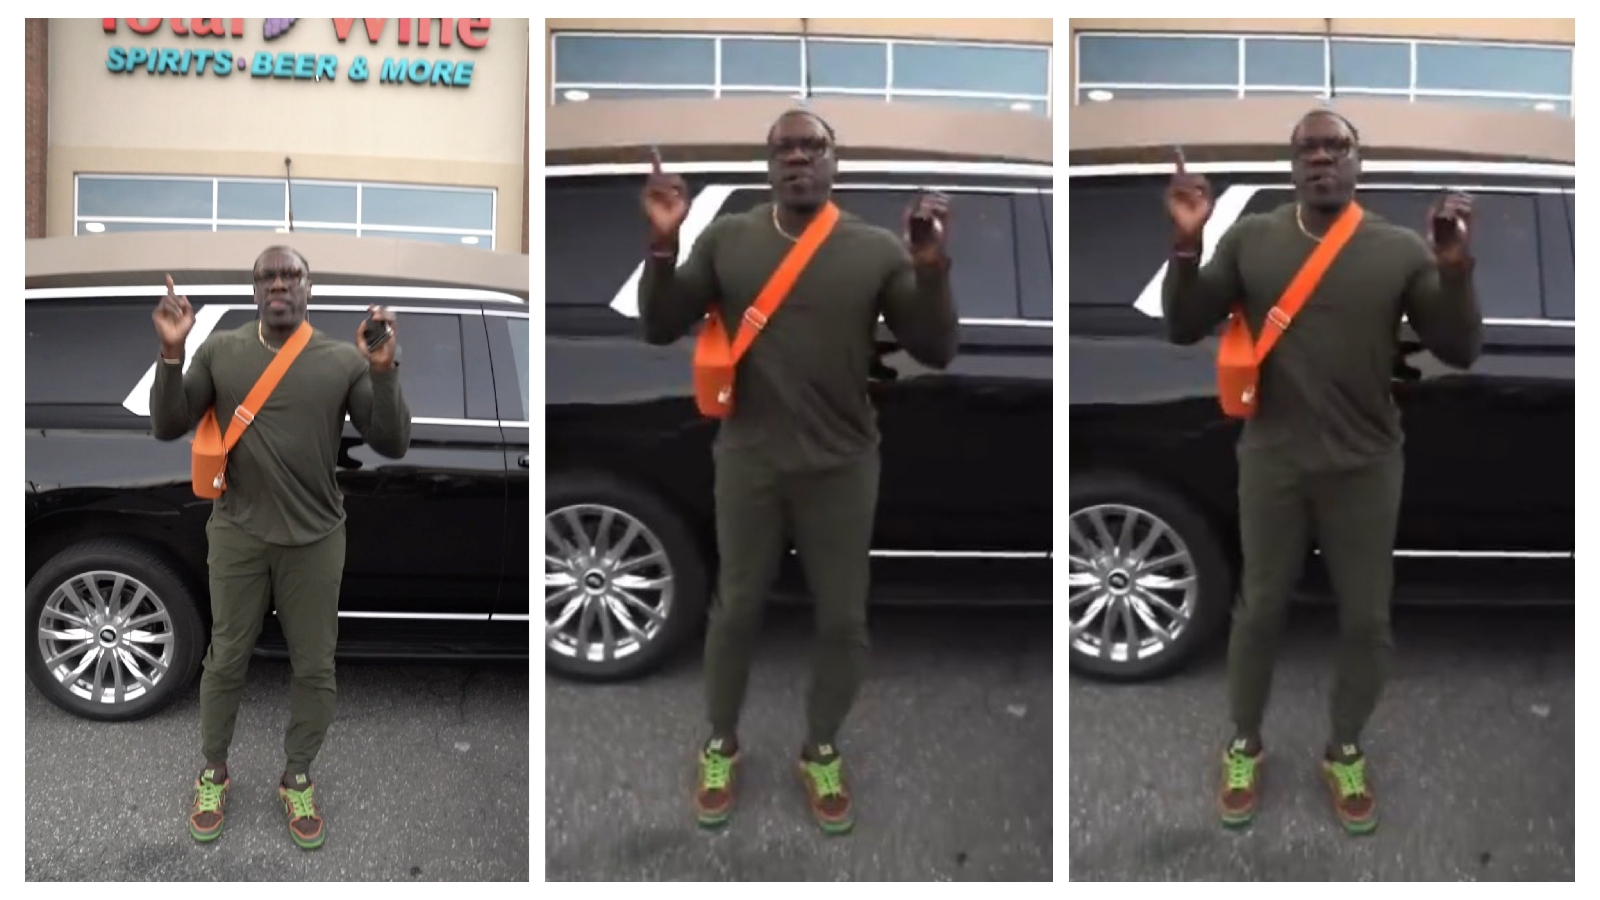 VIDEO Fans mock Shannon Sharpe wearing matching tight outfit and